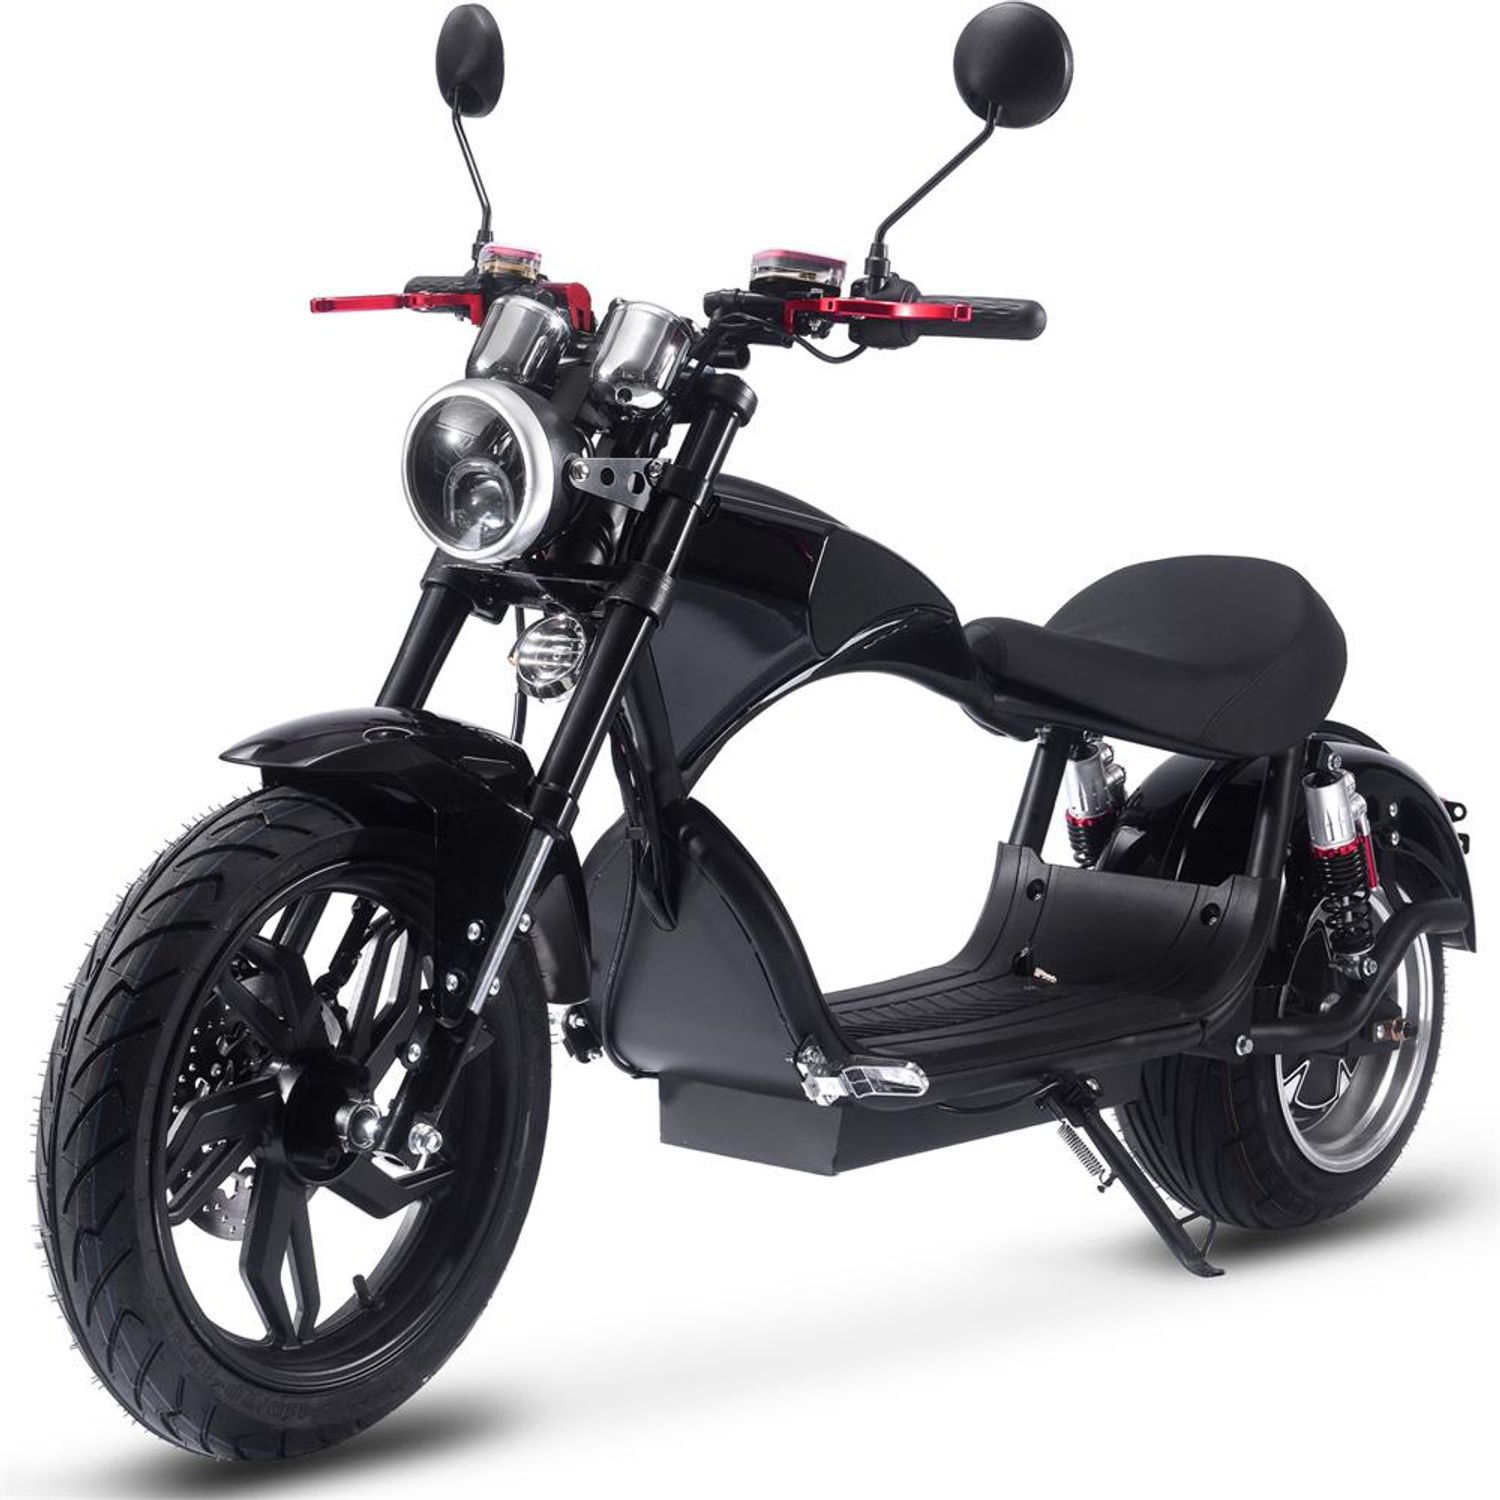 SAY YEAH M4 Black Electric Motorcycle 2500W 60V Top Speed 28mph Range Per Charge: 35 to 50 miles